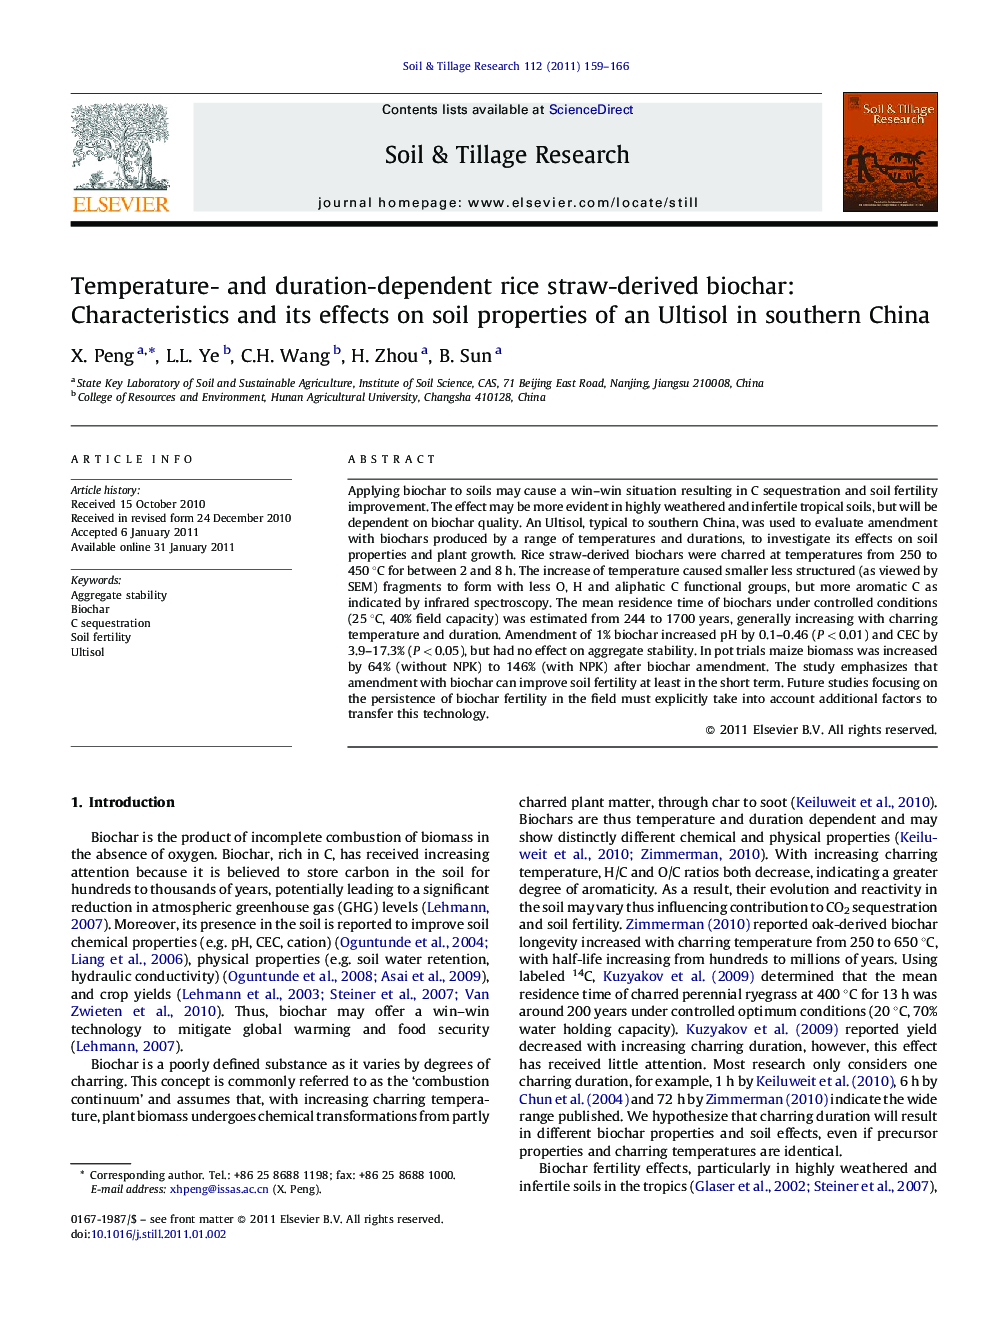 Temperature- and duration-dependent rice straw-derived biochar: Characteristics and its effects on soil properties of an Ultisol in southern China